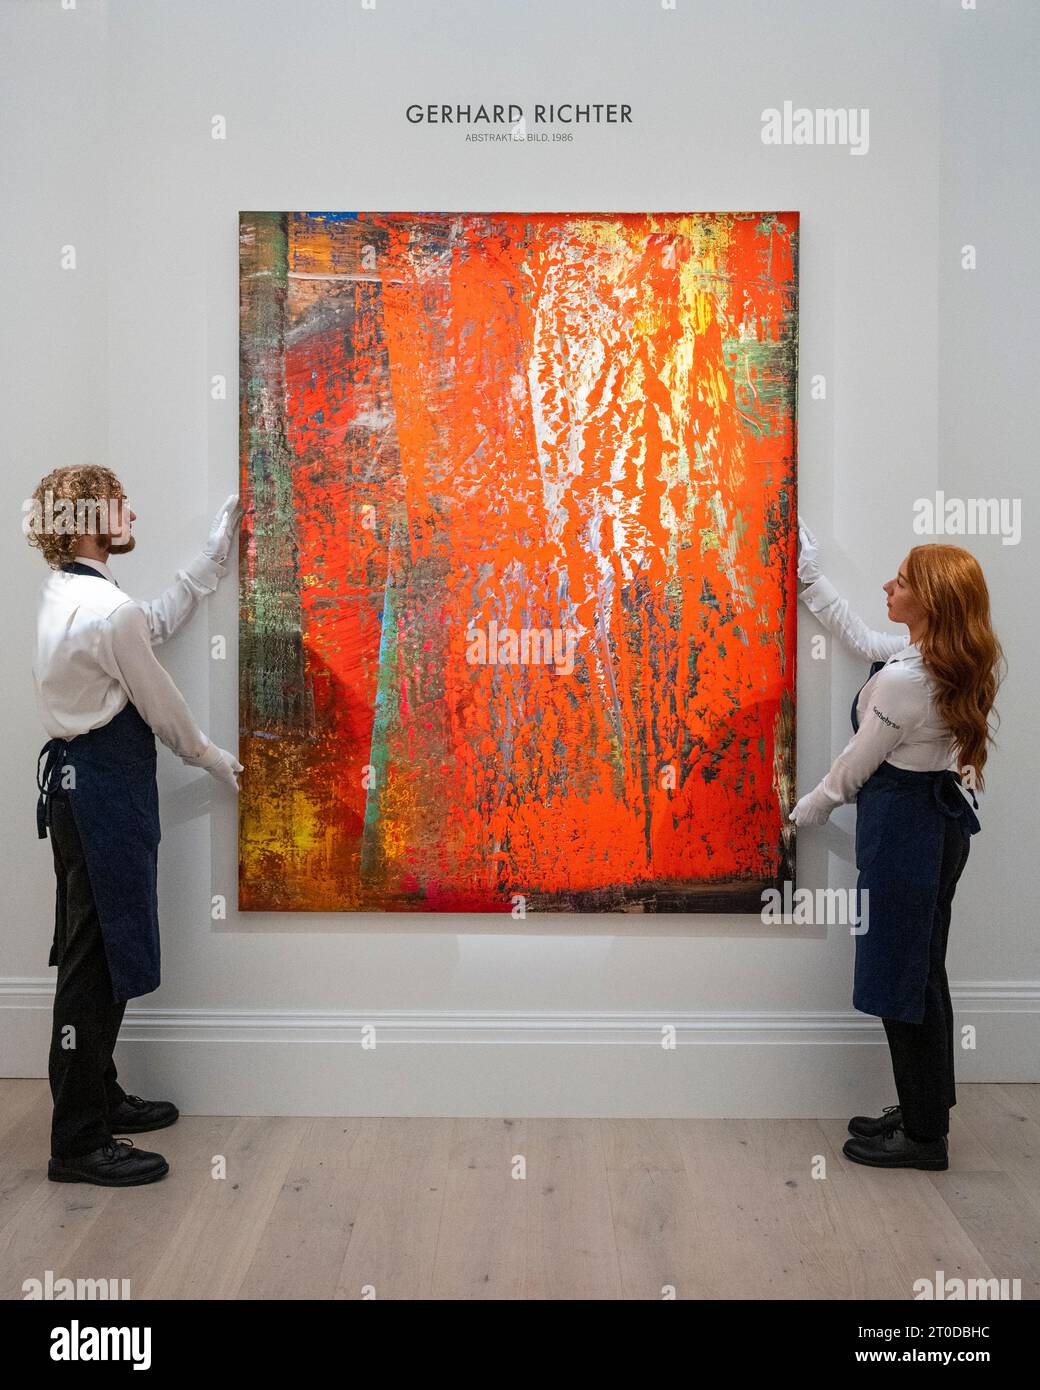 London, UK.  6 October 2023. Technicians present ‘Abstraktes Bild’, 1986, by Gerhard Richter (Est. GBP16,000,000 - 24,000,000) at a preview of highlights of Sotheby's’ Frieze Week 20th and 21st Century & Contemporary Art Auctions.  Lots will be auctioned at Sotheby's New Bond Street galleries on 12 and 13 October.  Credit: Stephen Chung / Alamy Live News Stock Photo